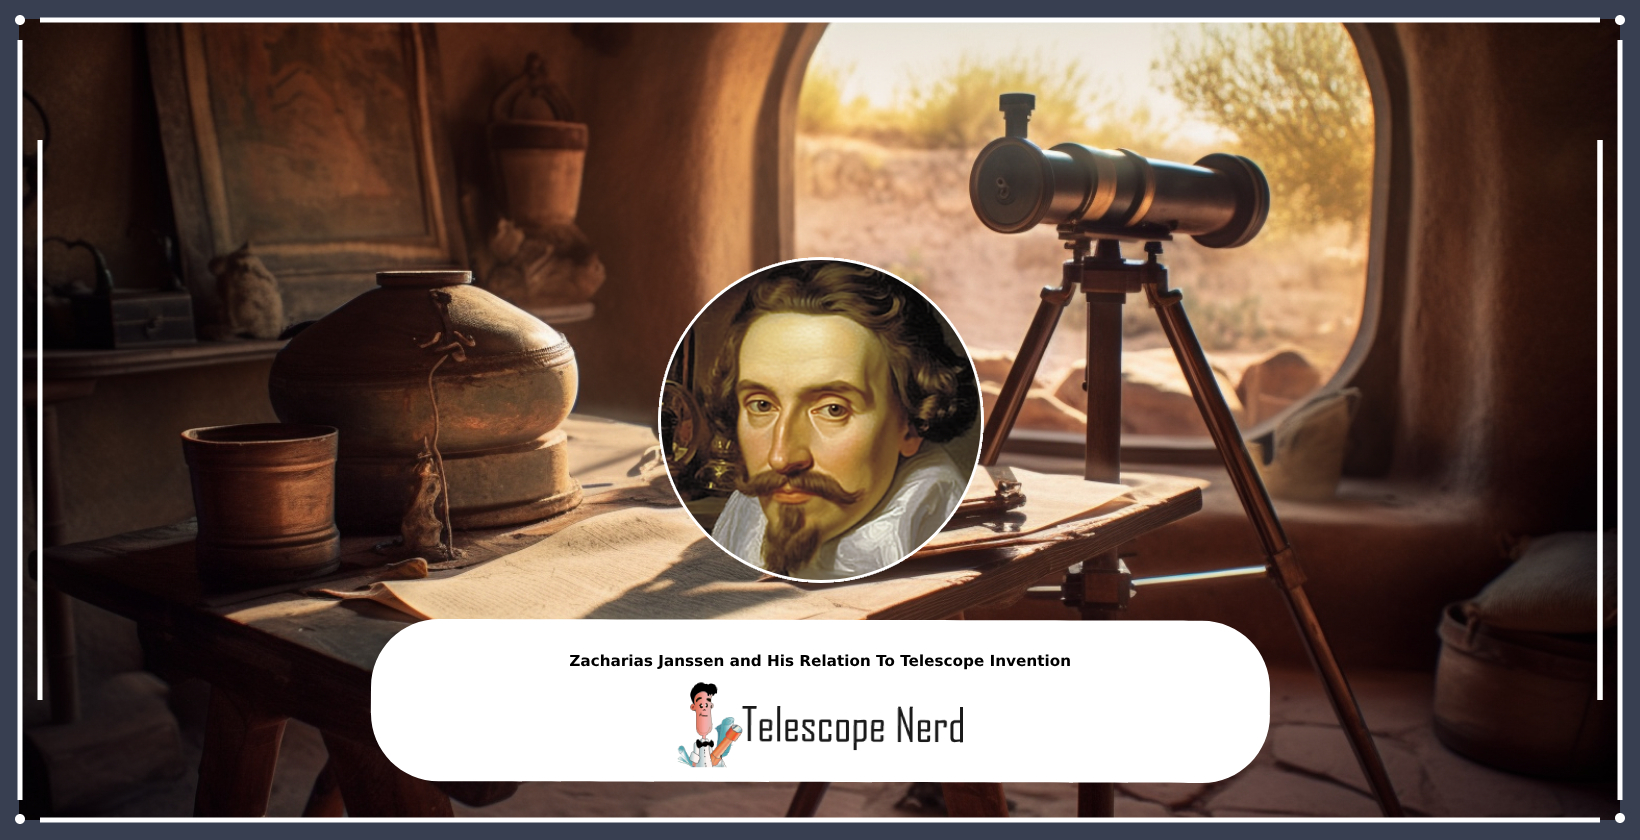 Zacharias Janssen spectacle-maker and his contributions to telescopes